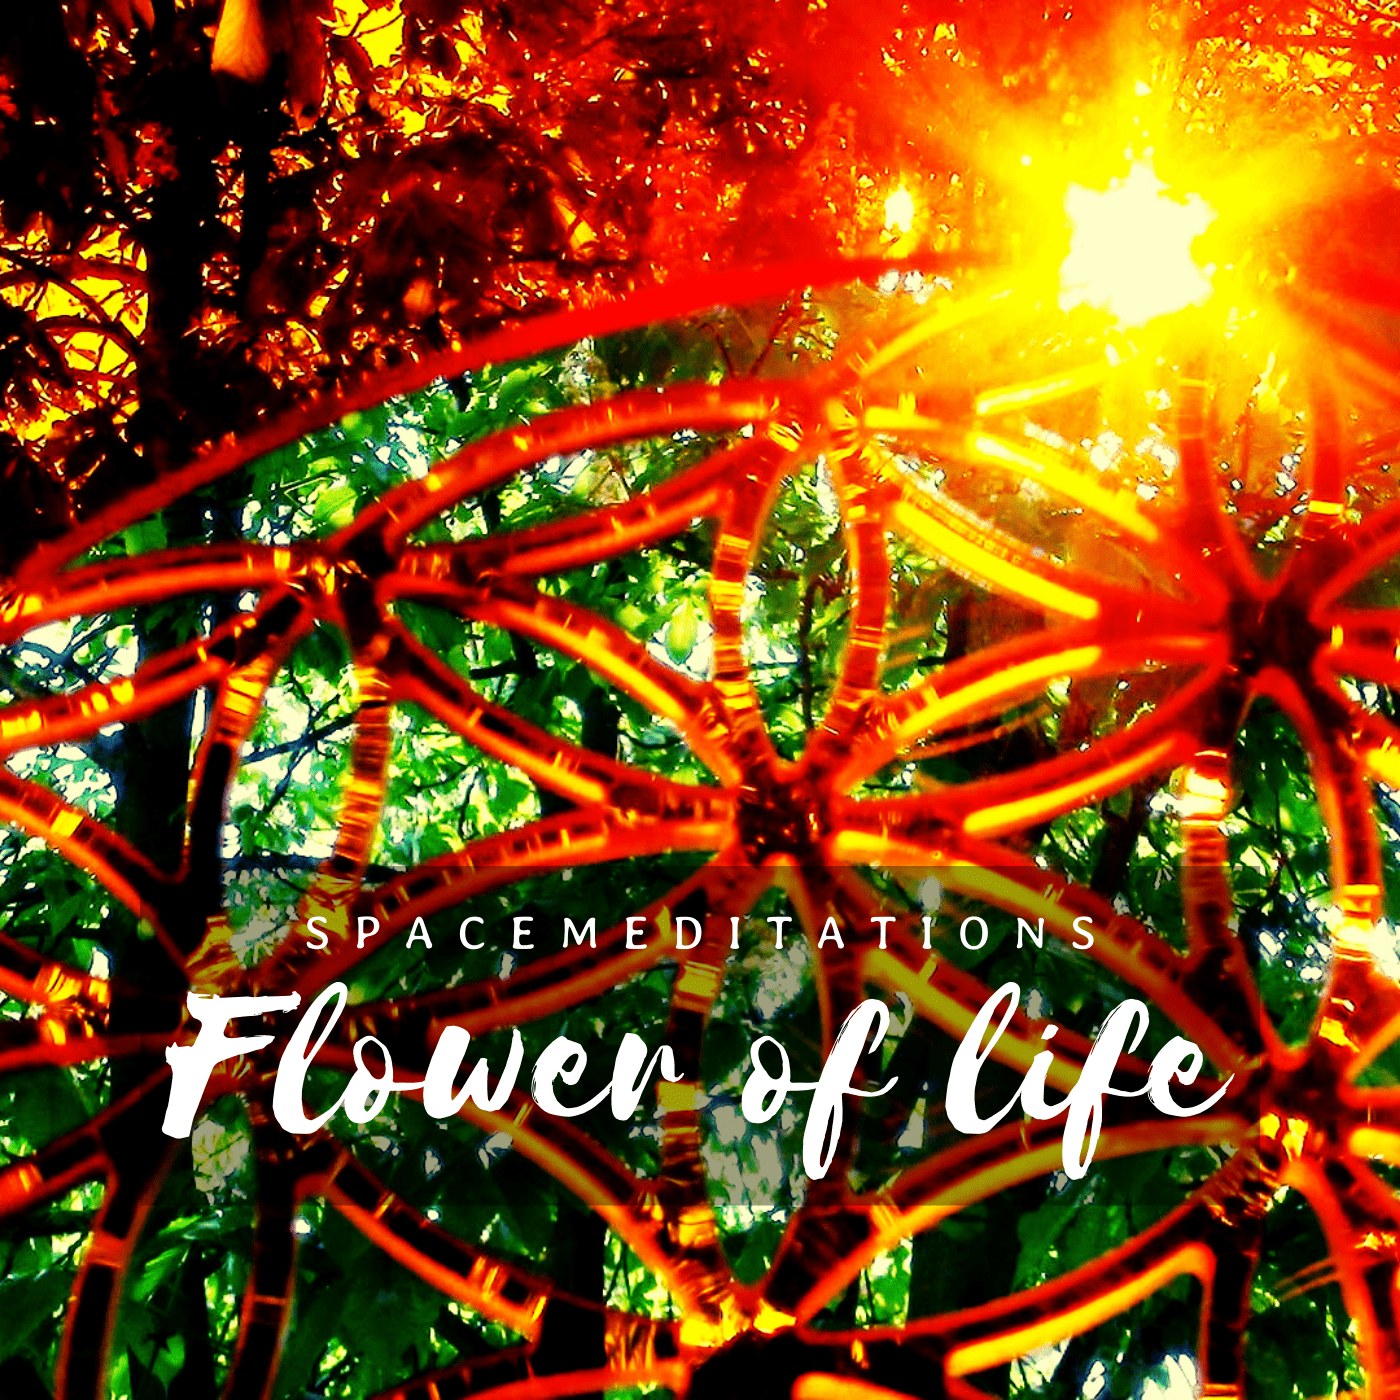 Flower of life. Spacemeditations